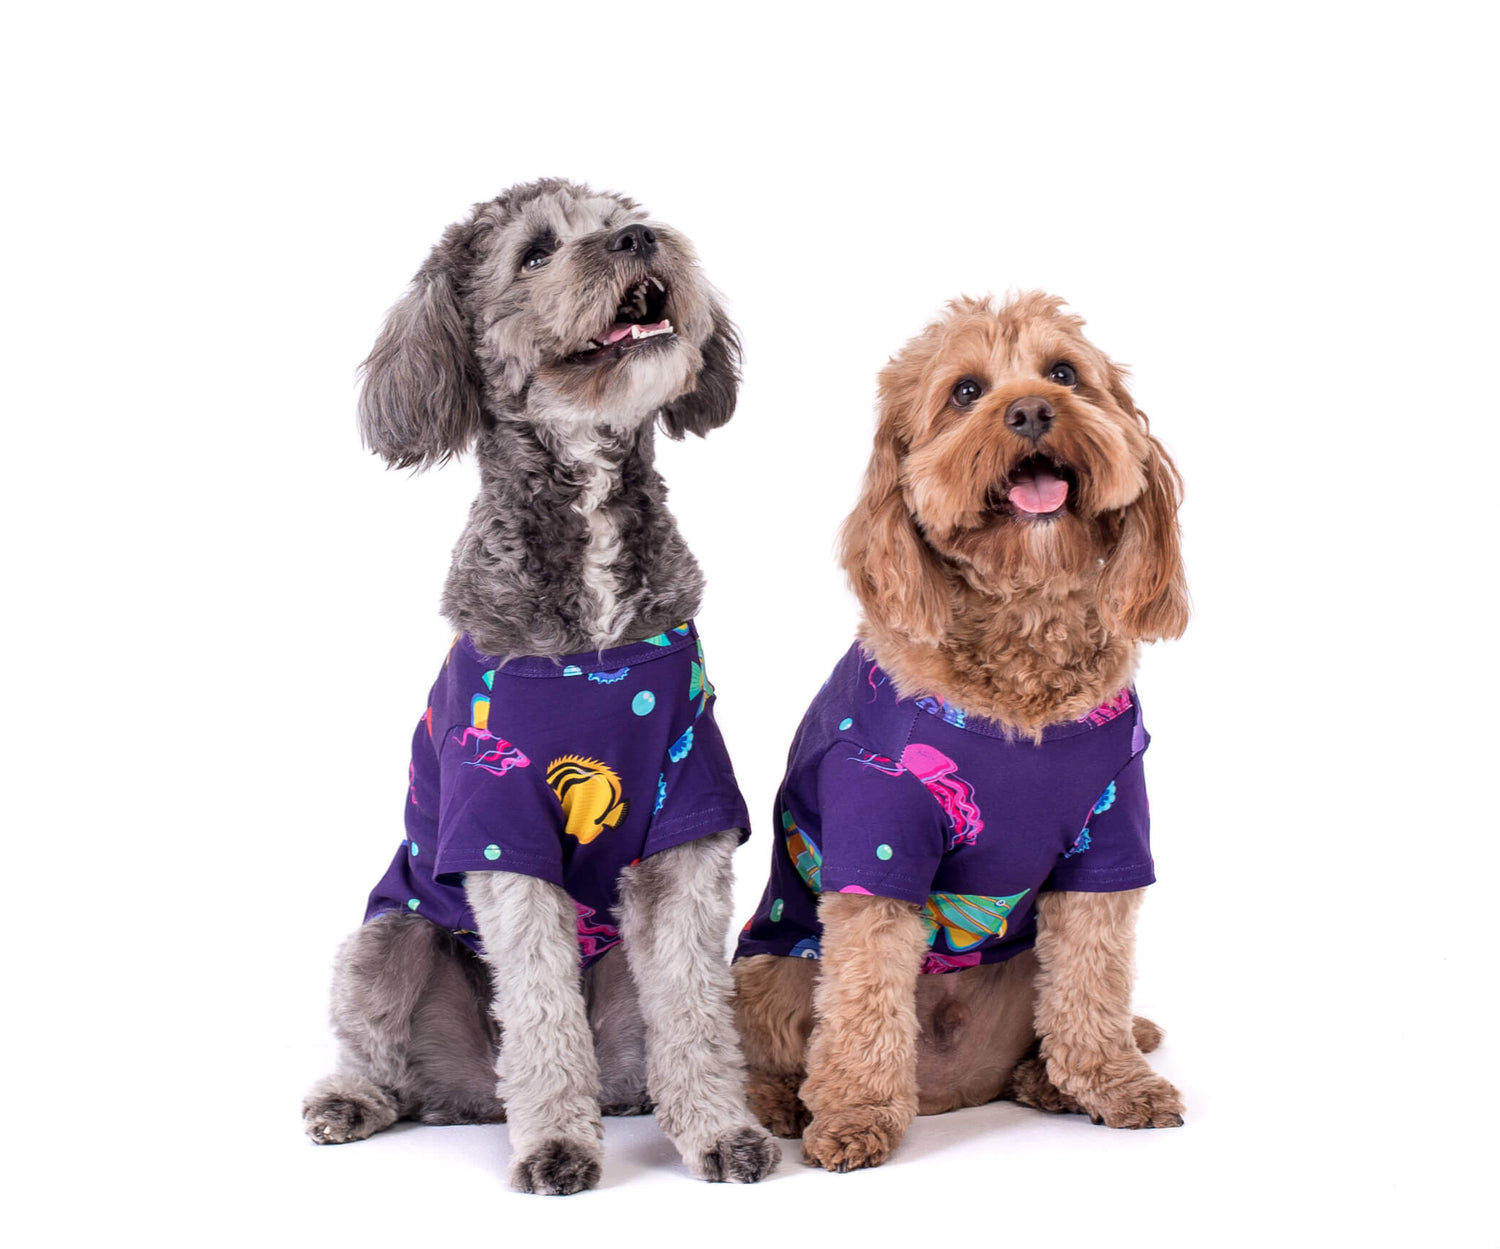 A photo of two caboodles wearing the 'Magic Sea' shirt from Vibrant Hound. The shirt is purple and adorned with vibrant tropical fish. The caboodles are facing the front, showcasing the colorful design.